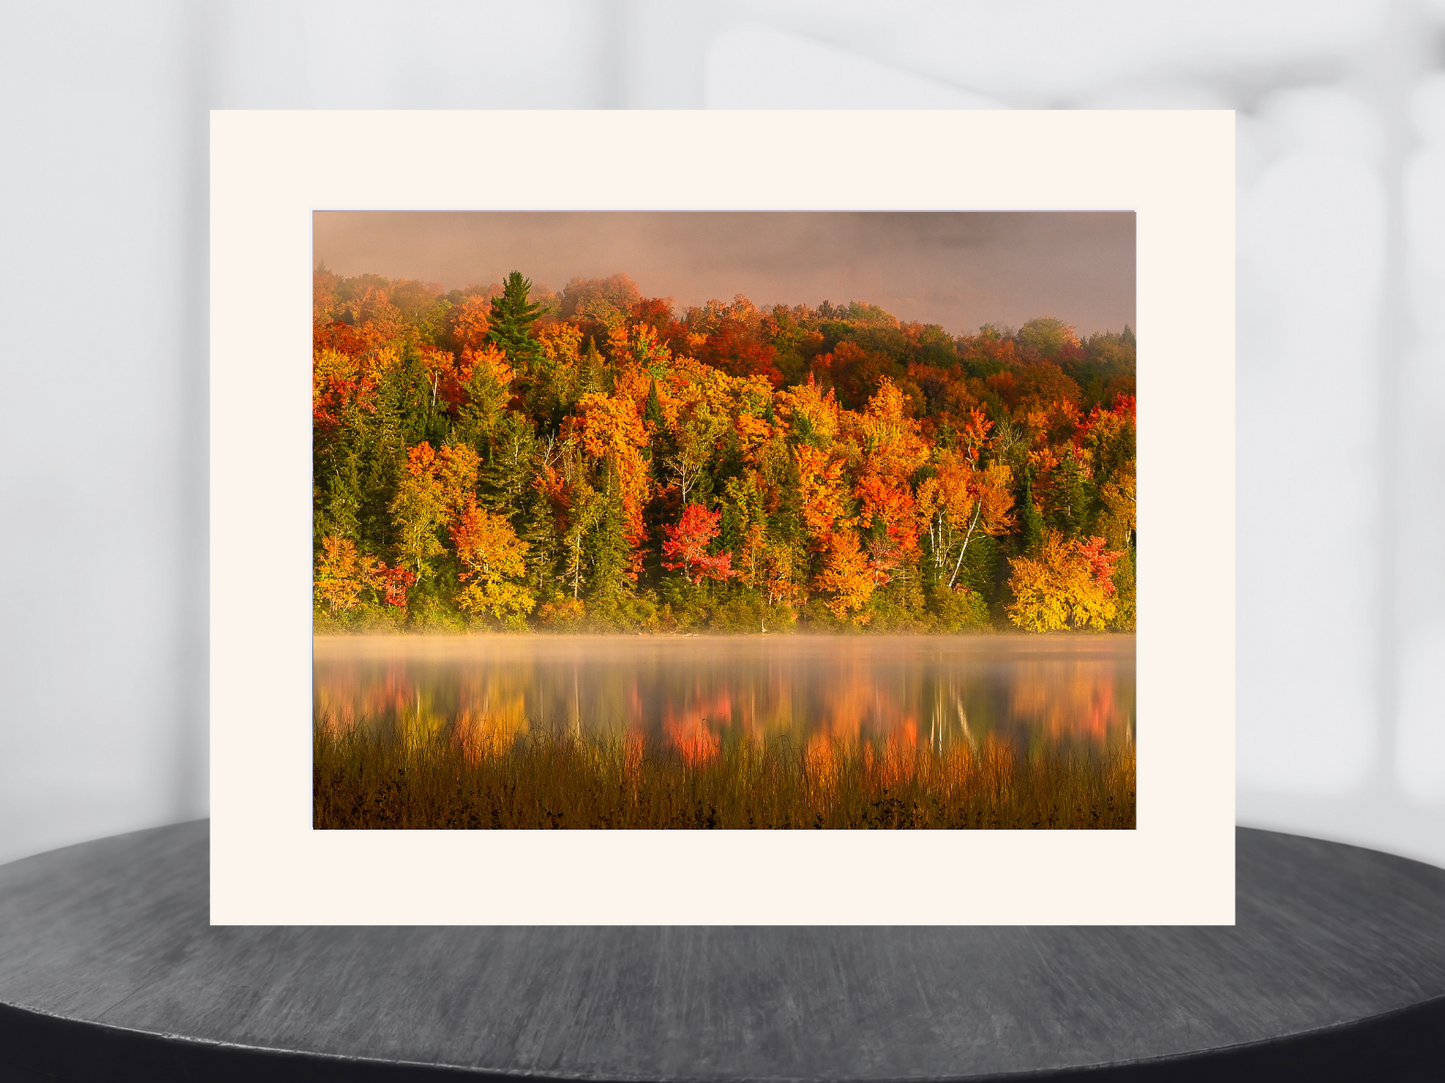 print of Autumn Reflections on a pond